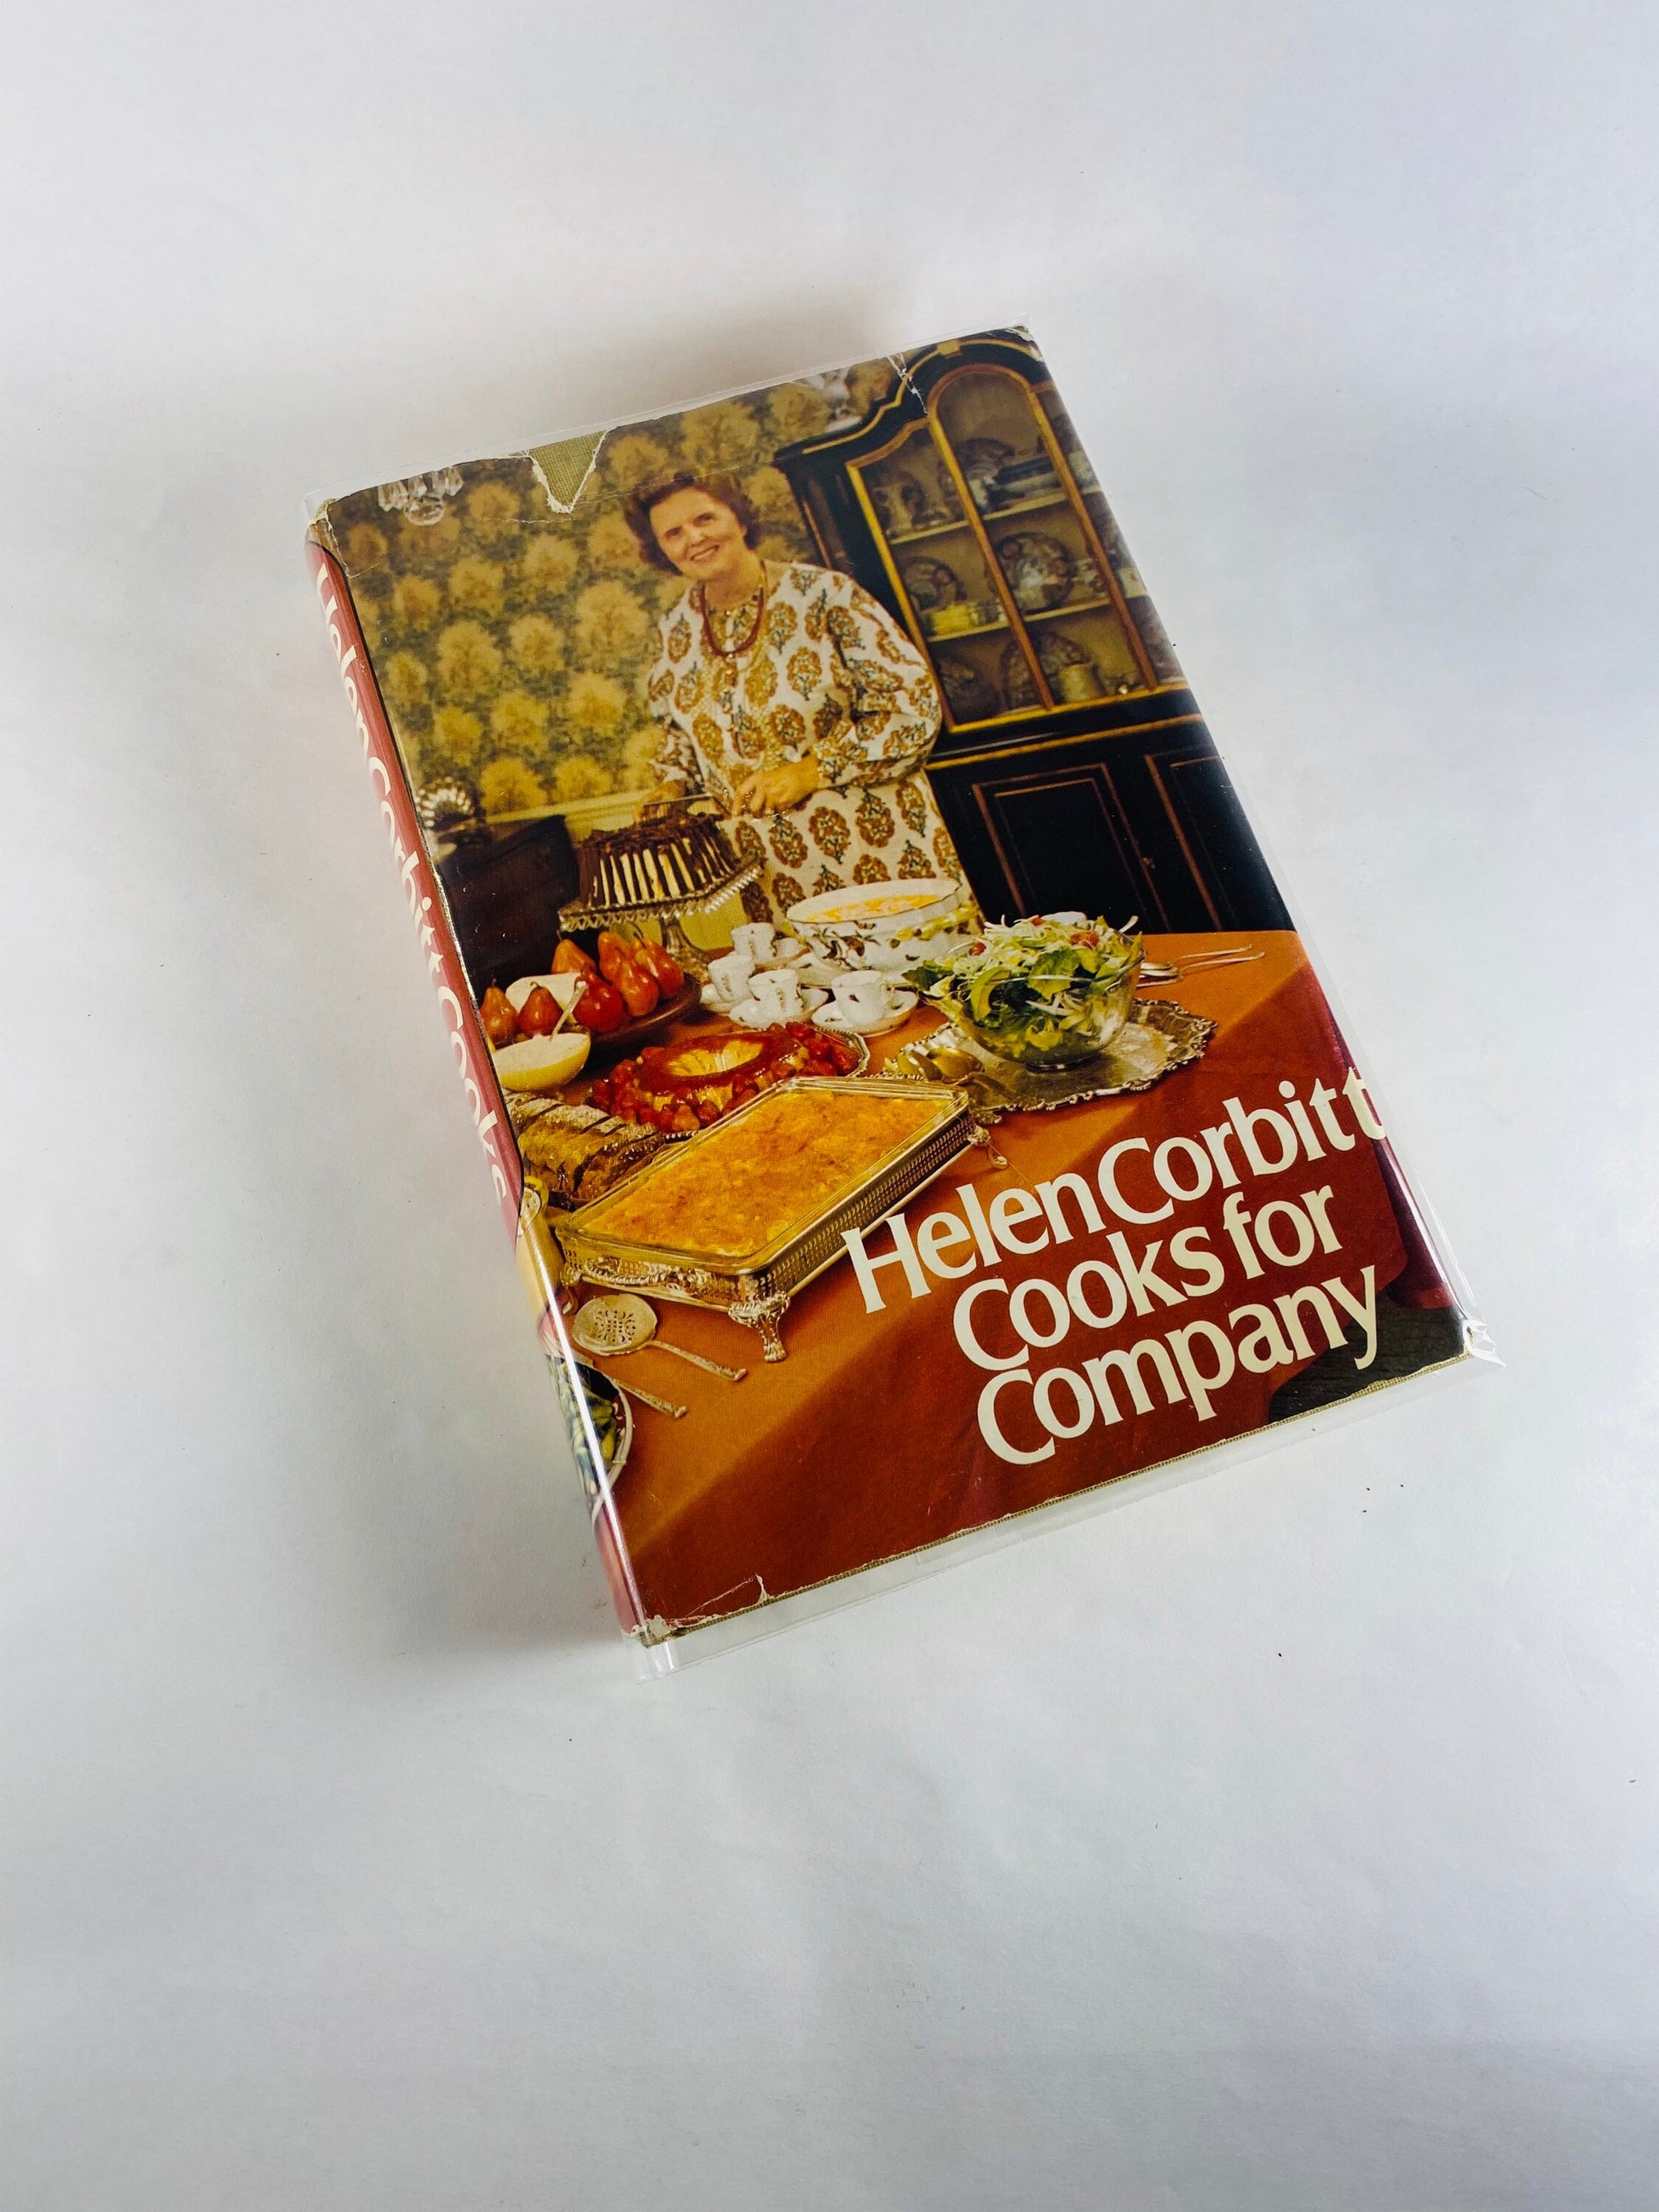 SIGNED Helen Corbitt Cooks for Company Cookbook FIRST edition Vintage book circa 1974. Mid-century cookbook Iconic Cook Book Neiman-Marcus